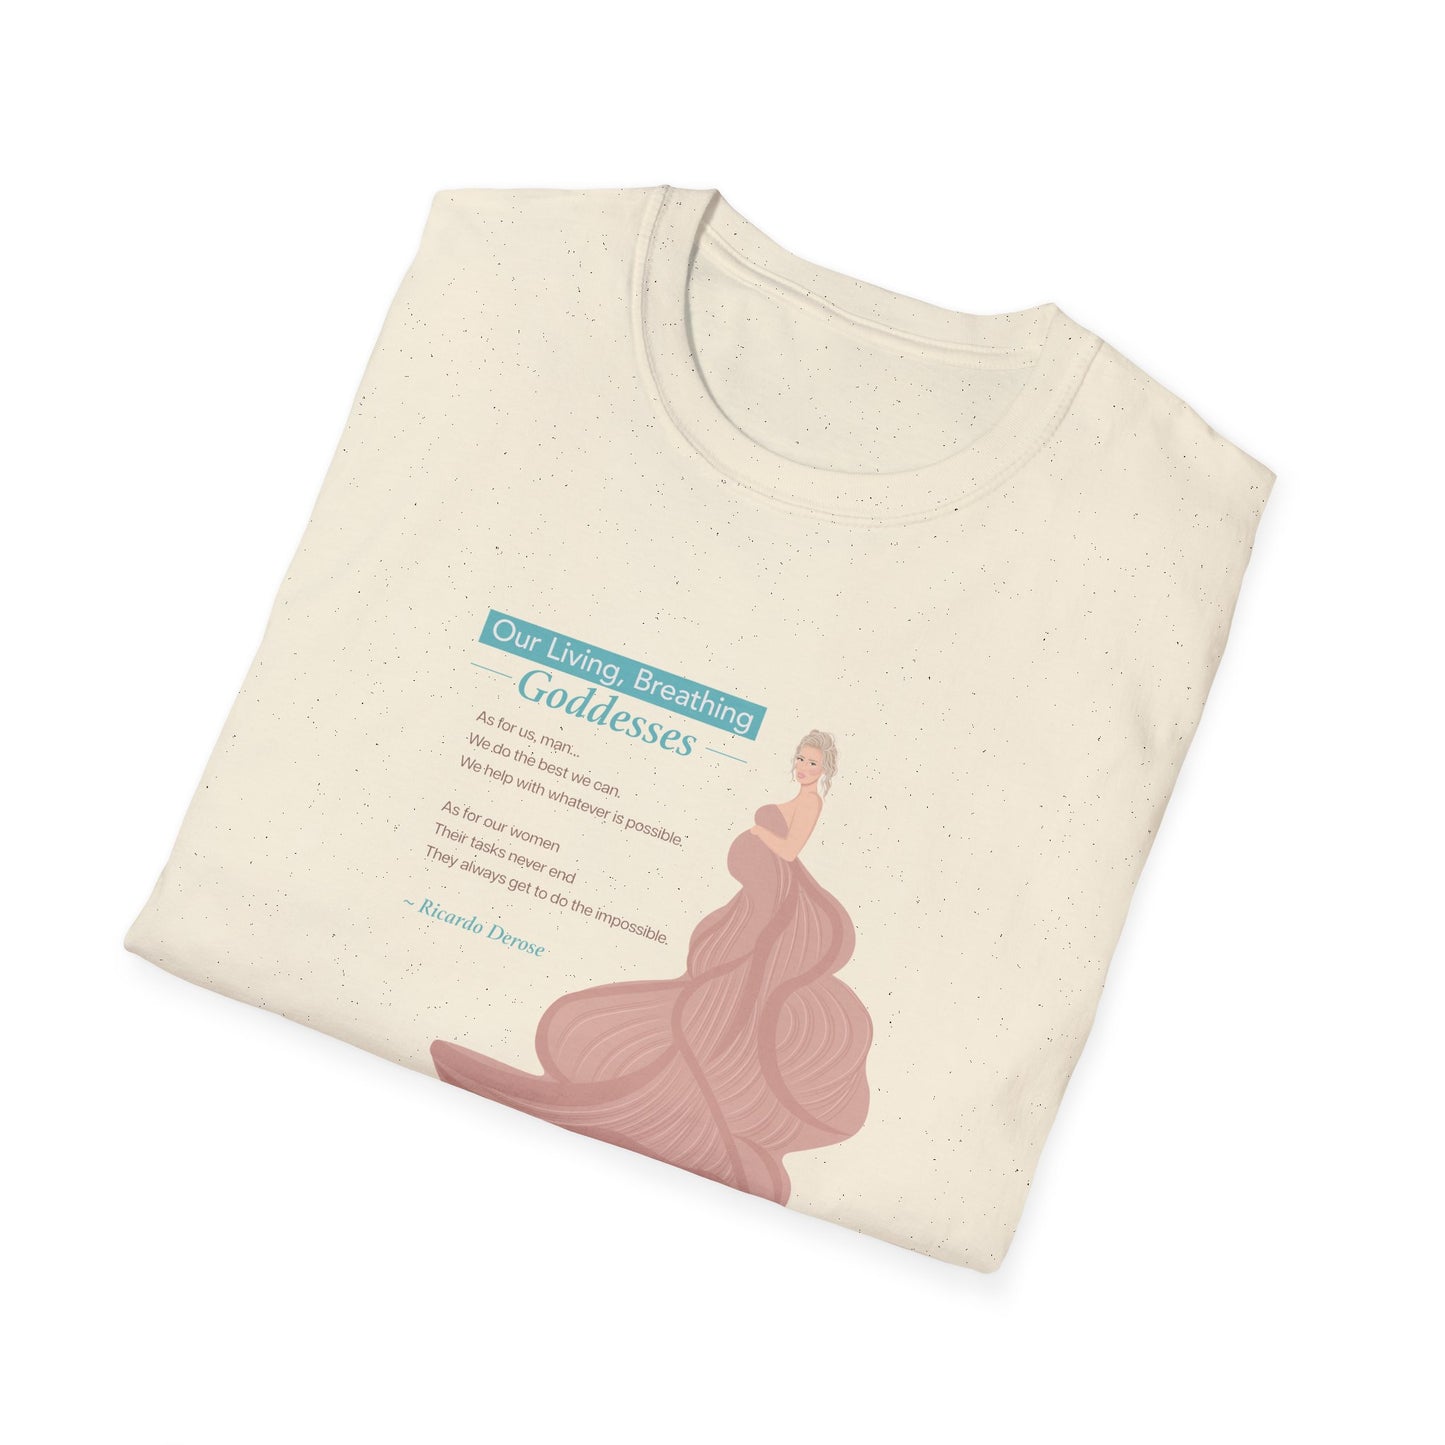 Our Living, Breathing Goddess_Unisex Softstyle T-Shirt